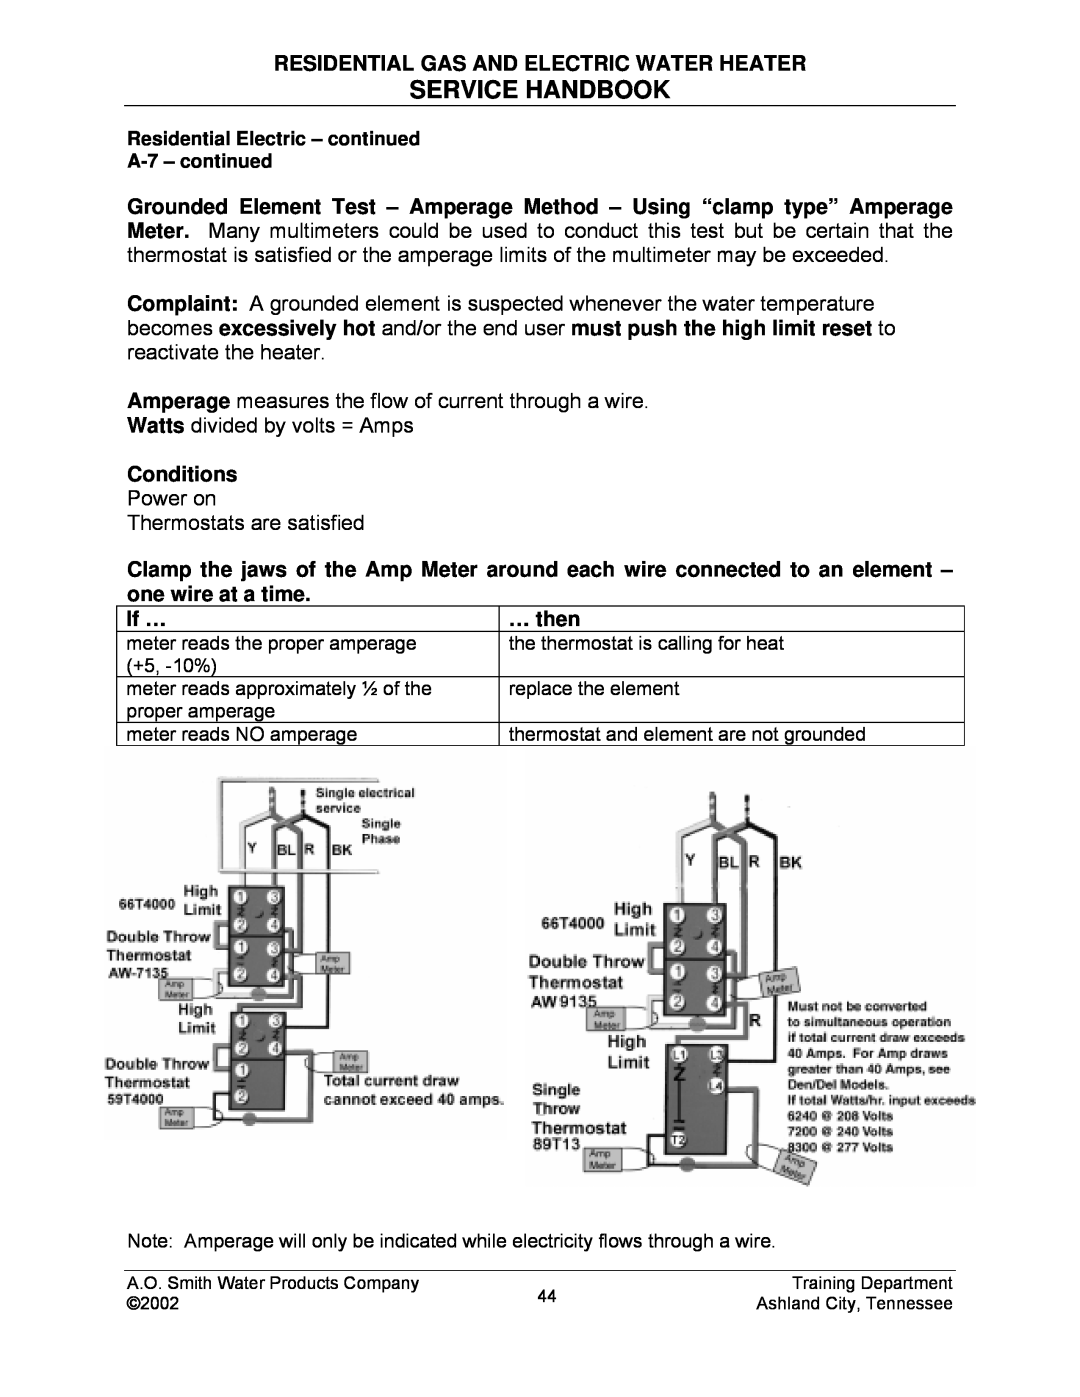 A.O. Smith TC-049-R2 manual Service Handbook, Residential Gas And Electric Water Heater, Conditions, If …, … then 